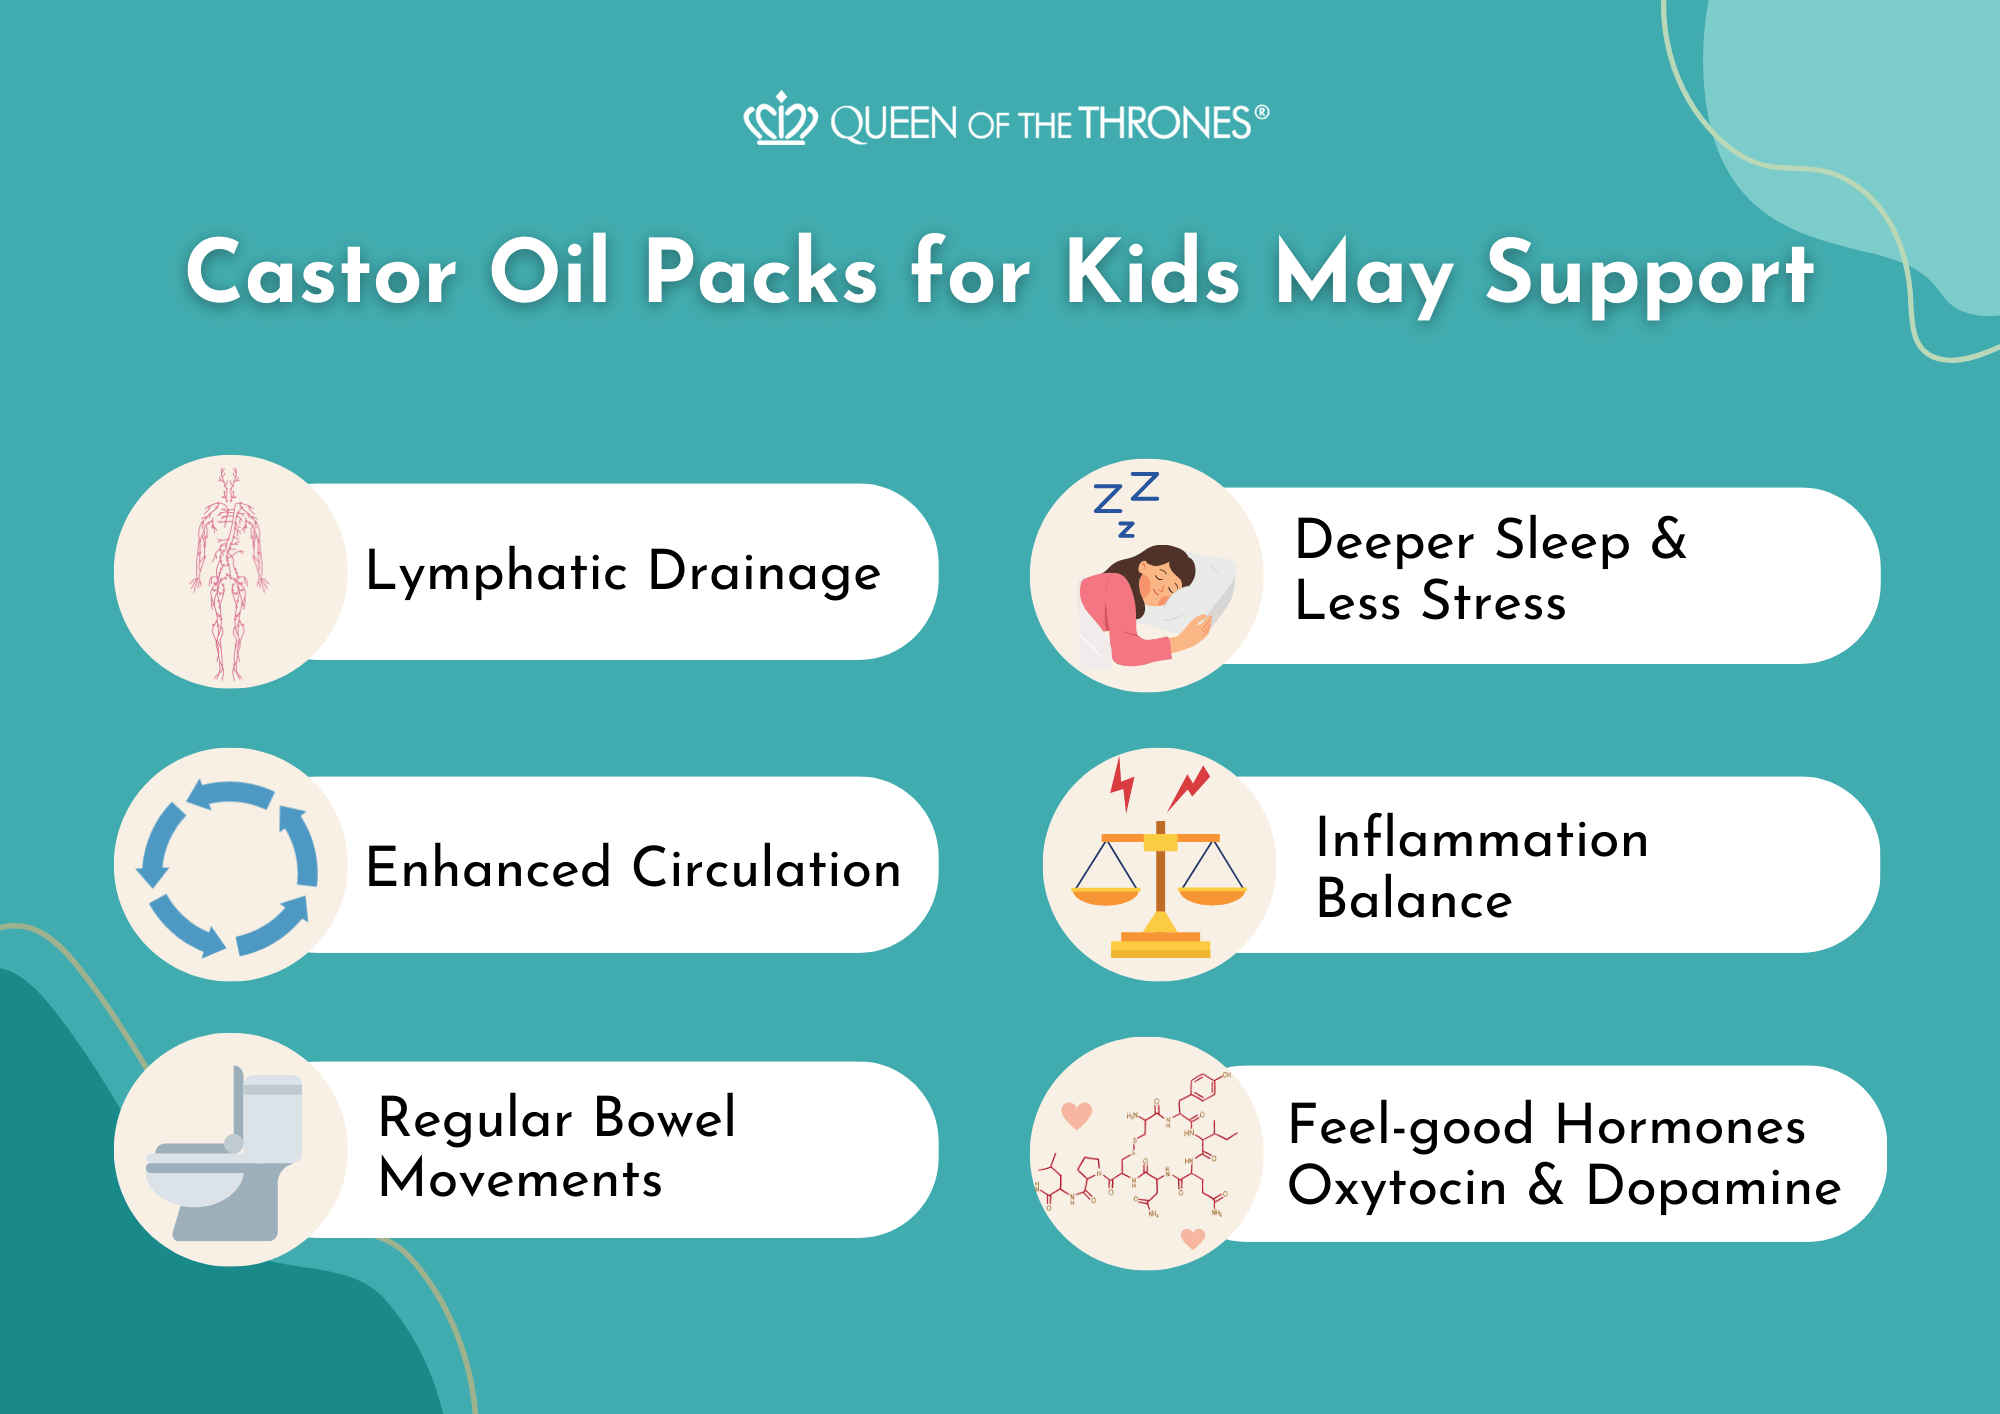 What-Castor-Oil Packs for kids supports by Queen of the Thrones